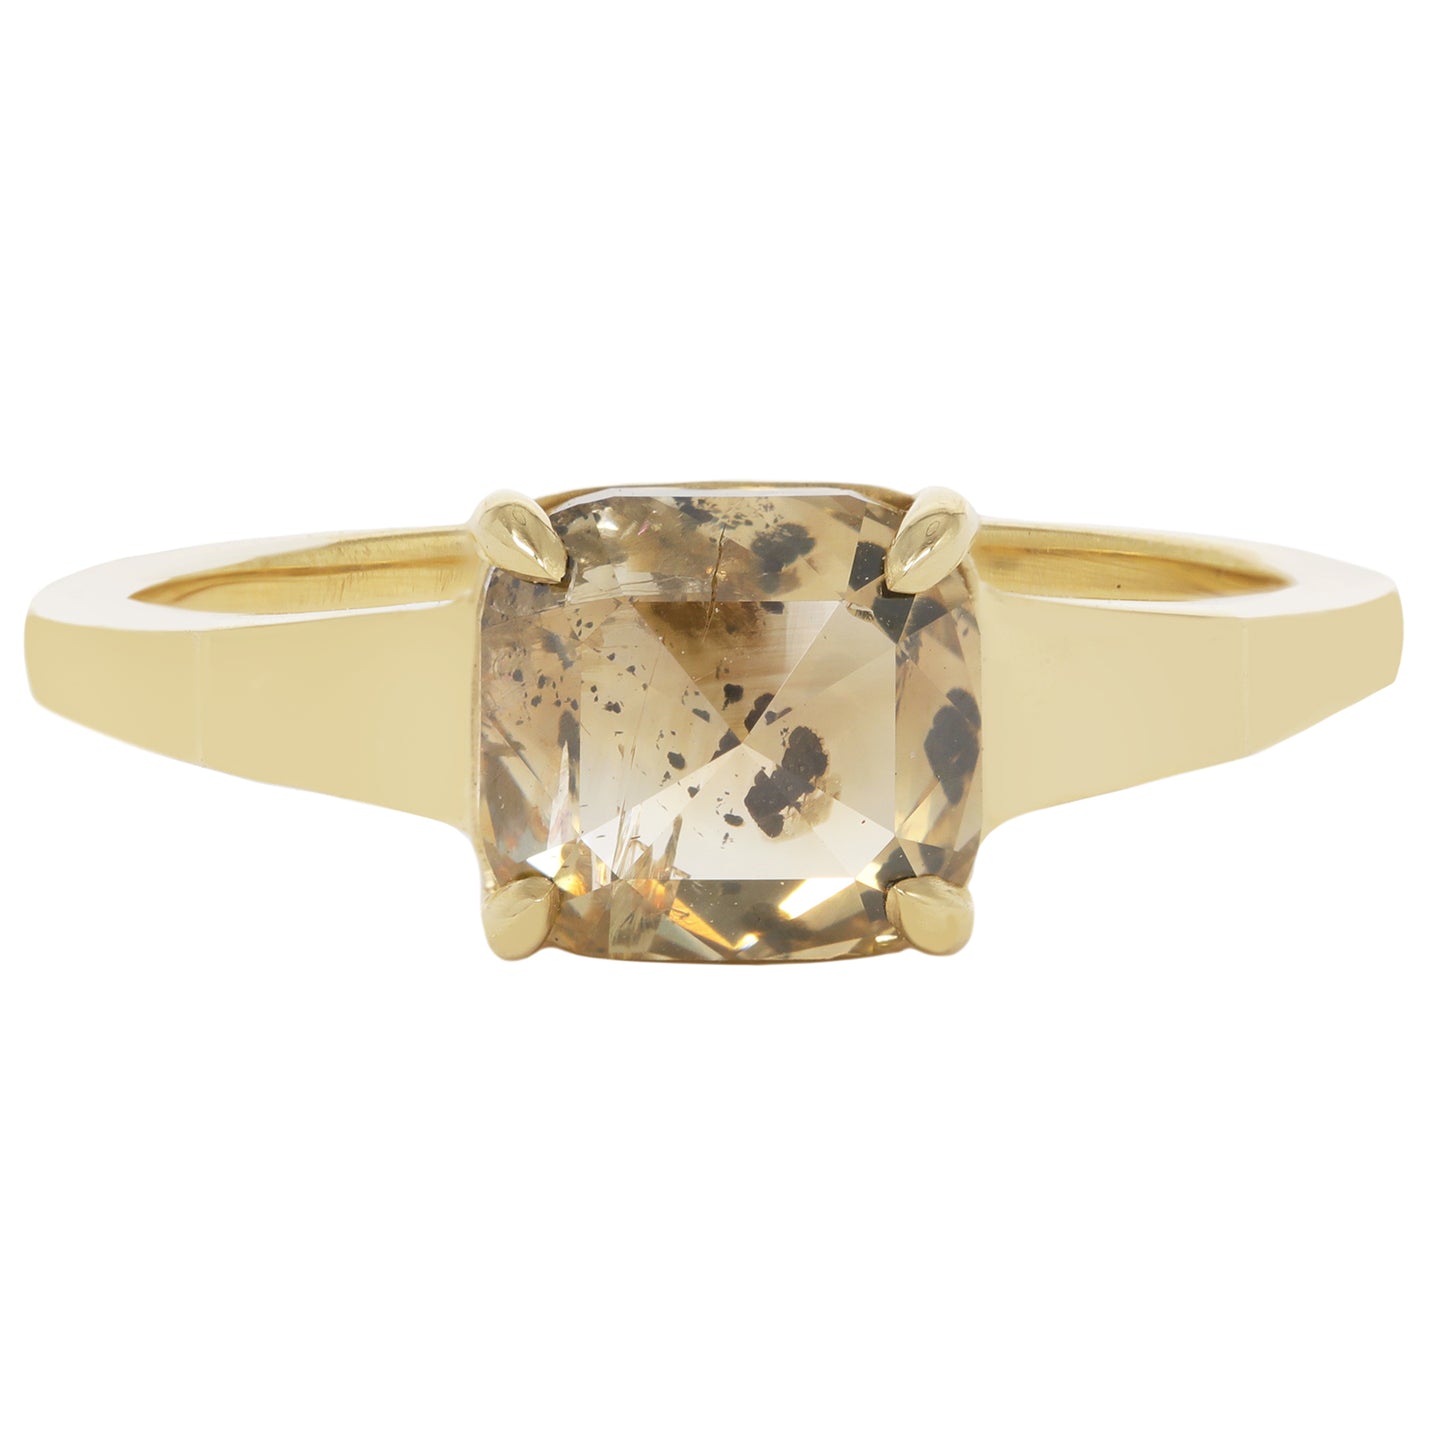 Speckled Champagne Diamond Ring